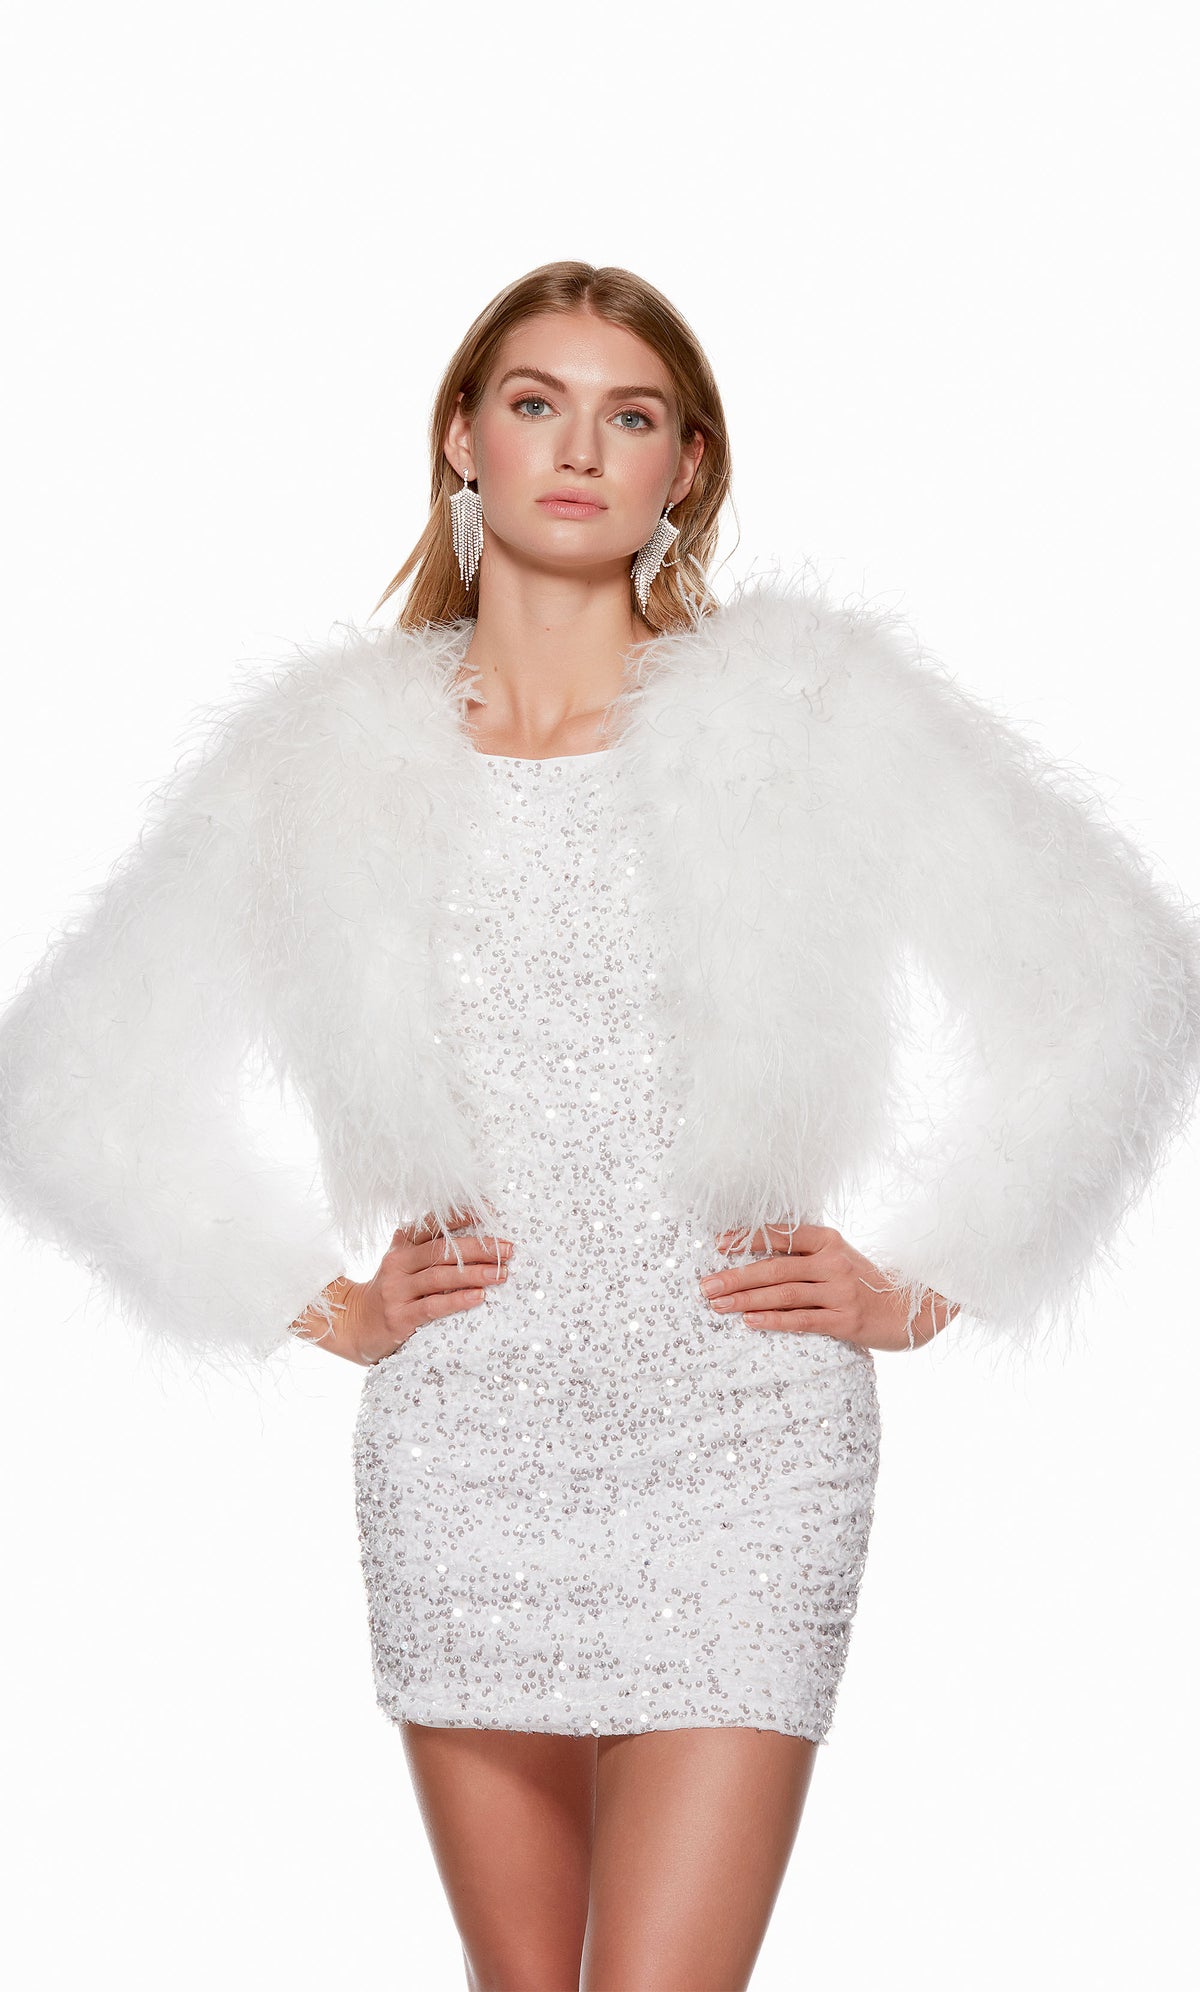 A feathered, white cropped jacket with long sleeves, perfect for a formal event.